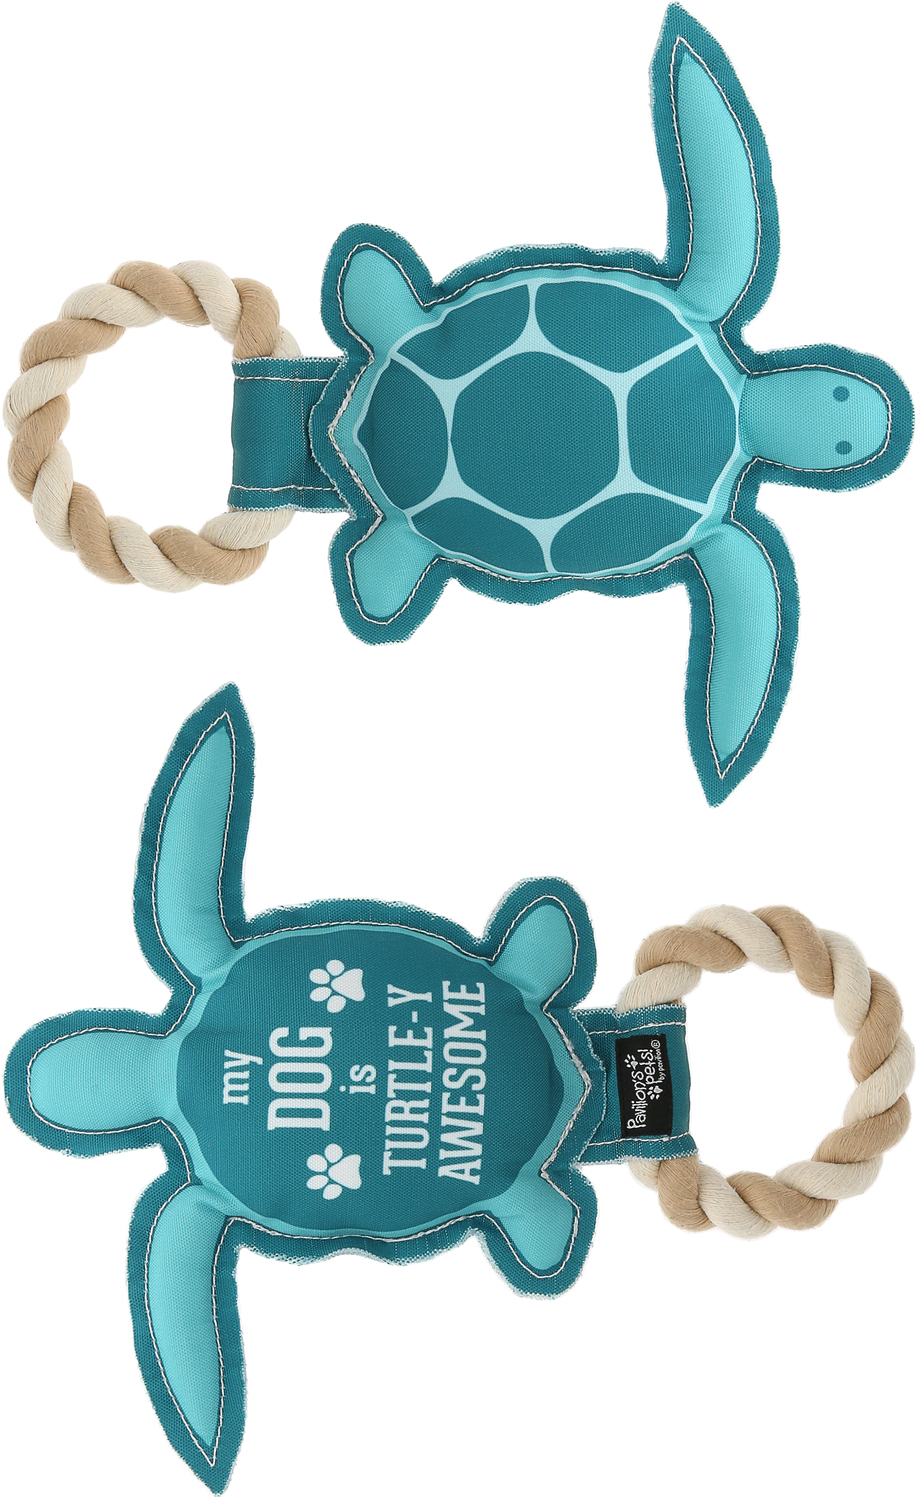 Turtle-y Awesome by Pavilion's Pets - Turtle-y Awesome - 9" Canvas Dog Toy on Rope